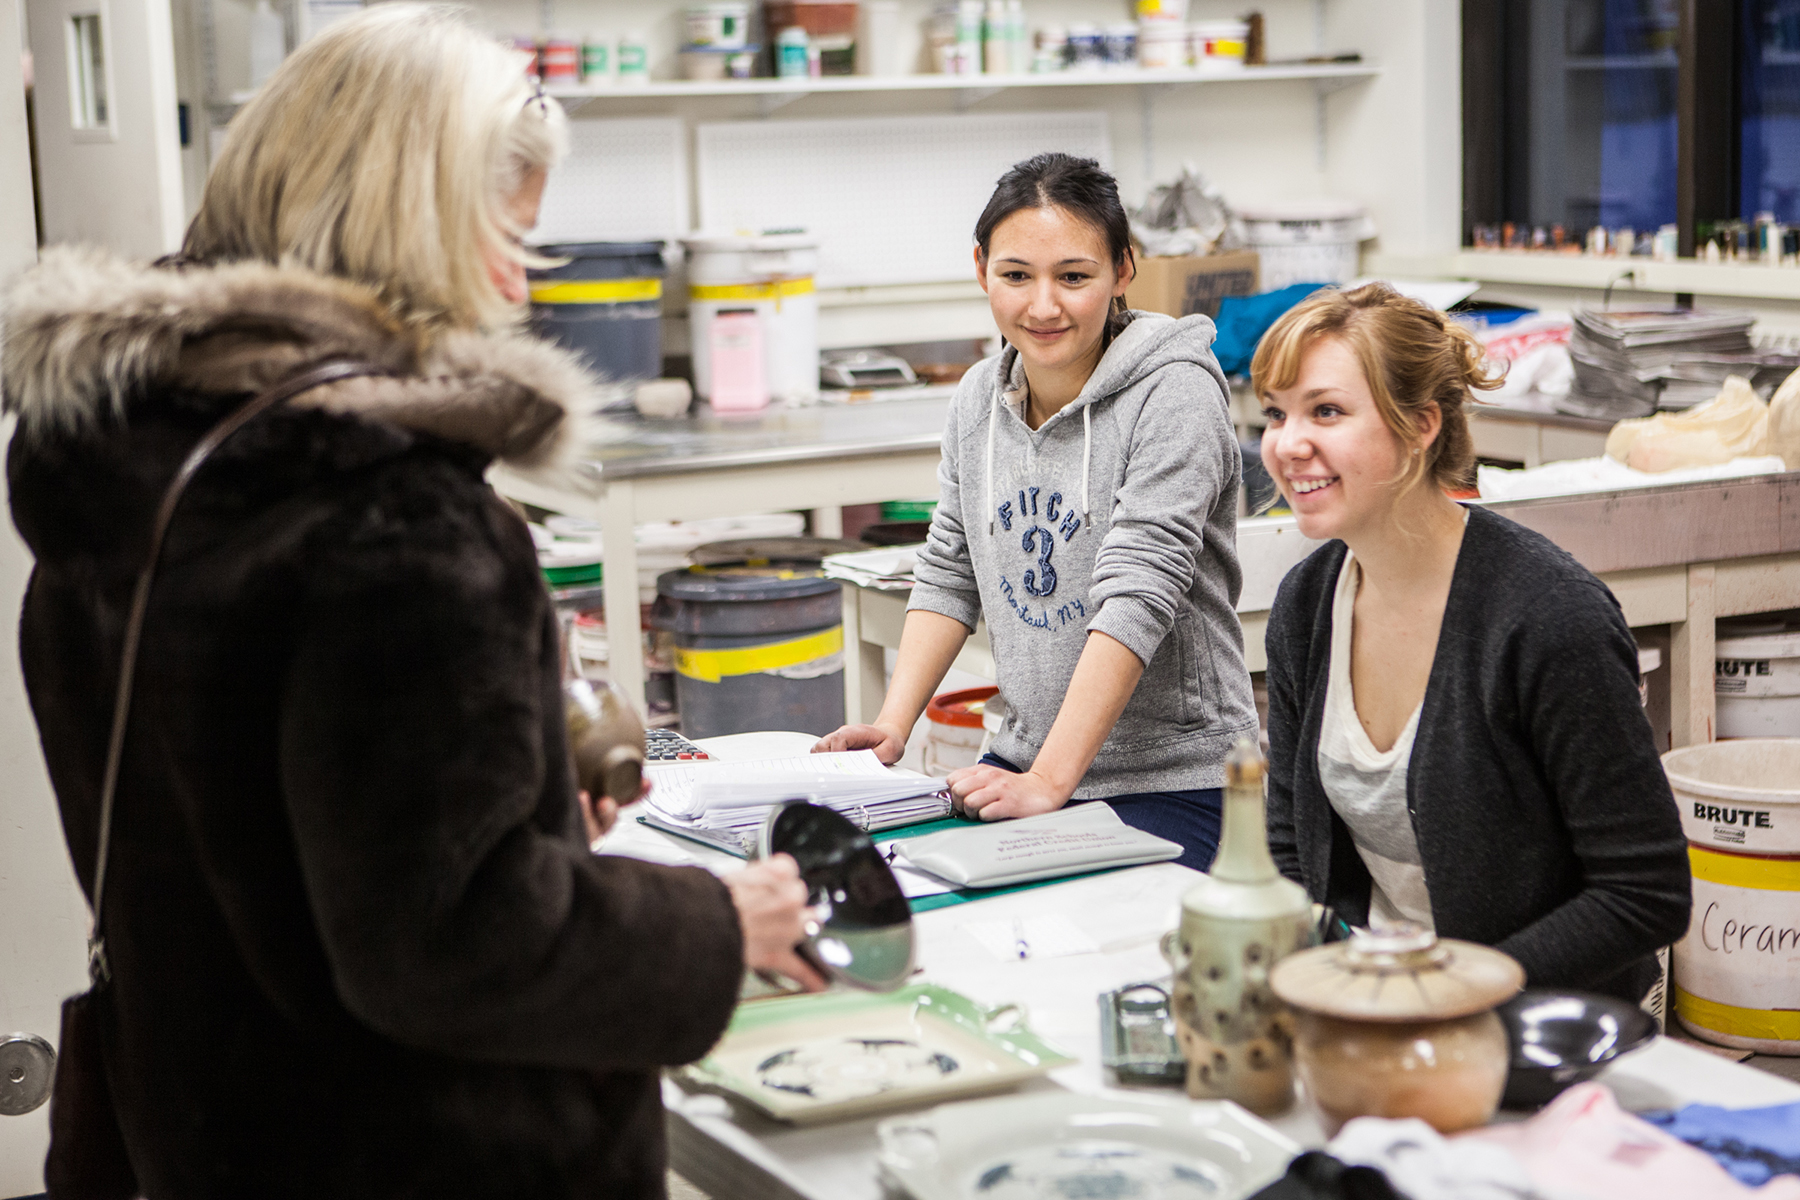 Emily Blurton, center, and Kirsten Olson, complete a transaction during the 2012 Student Artist Ceramics sale in December 2012.